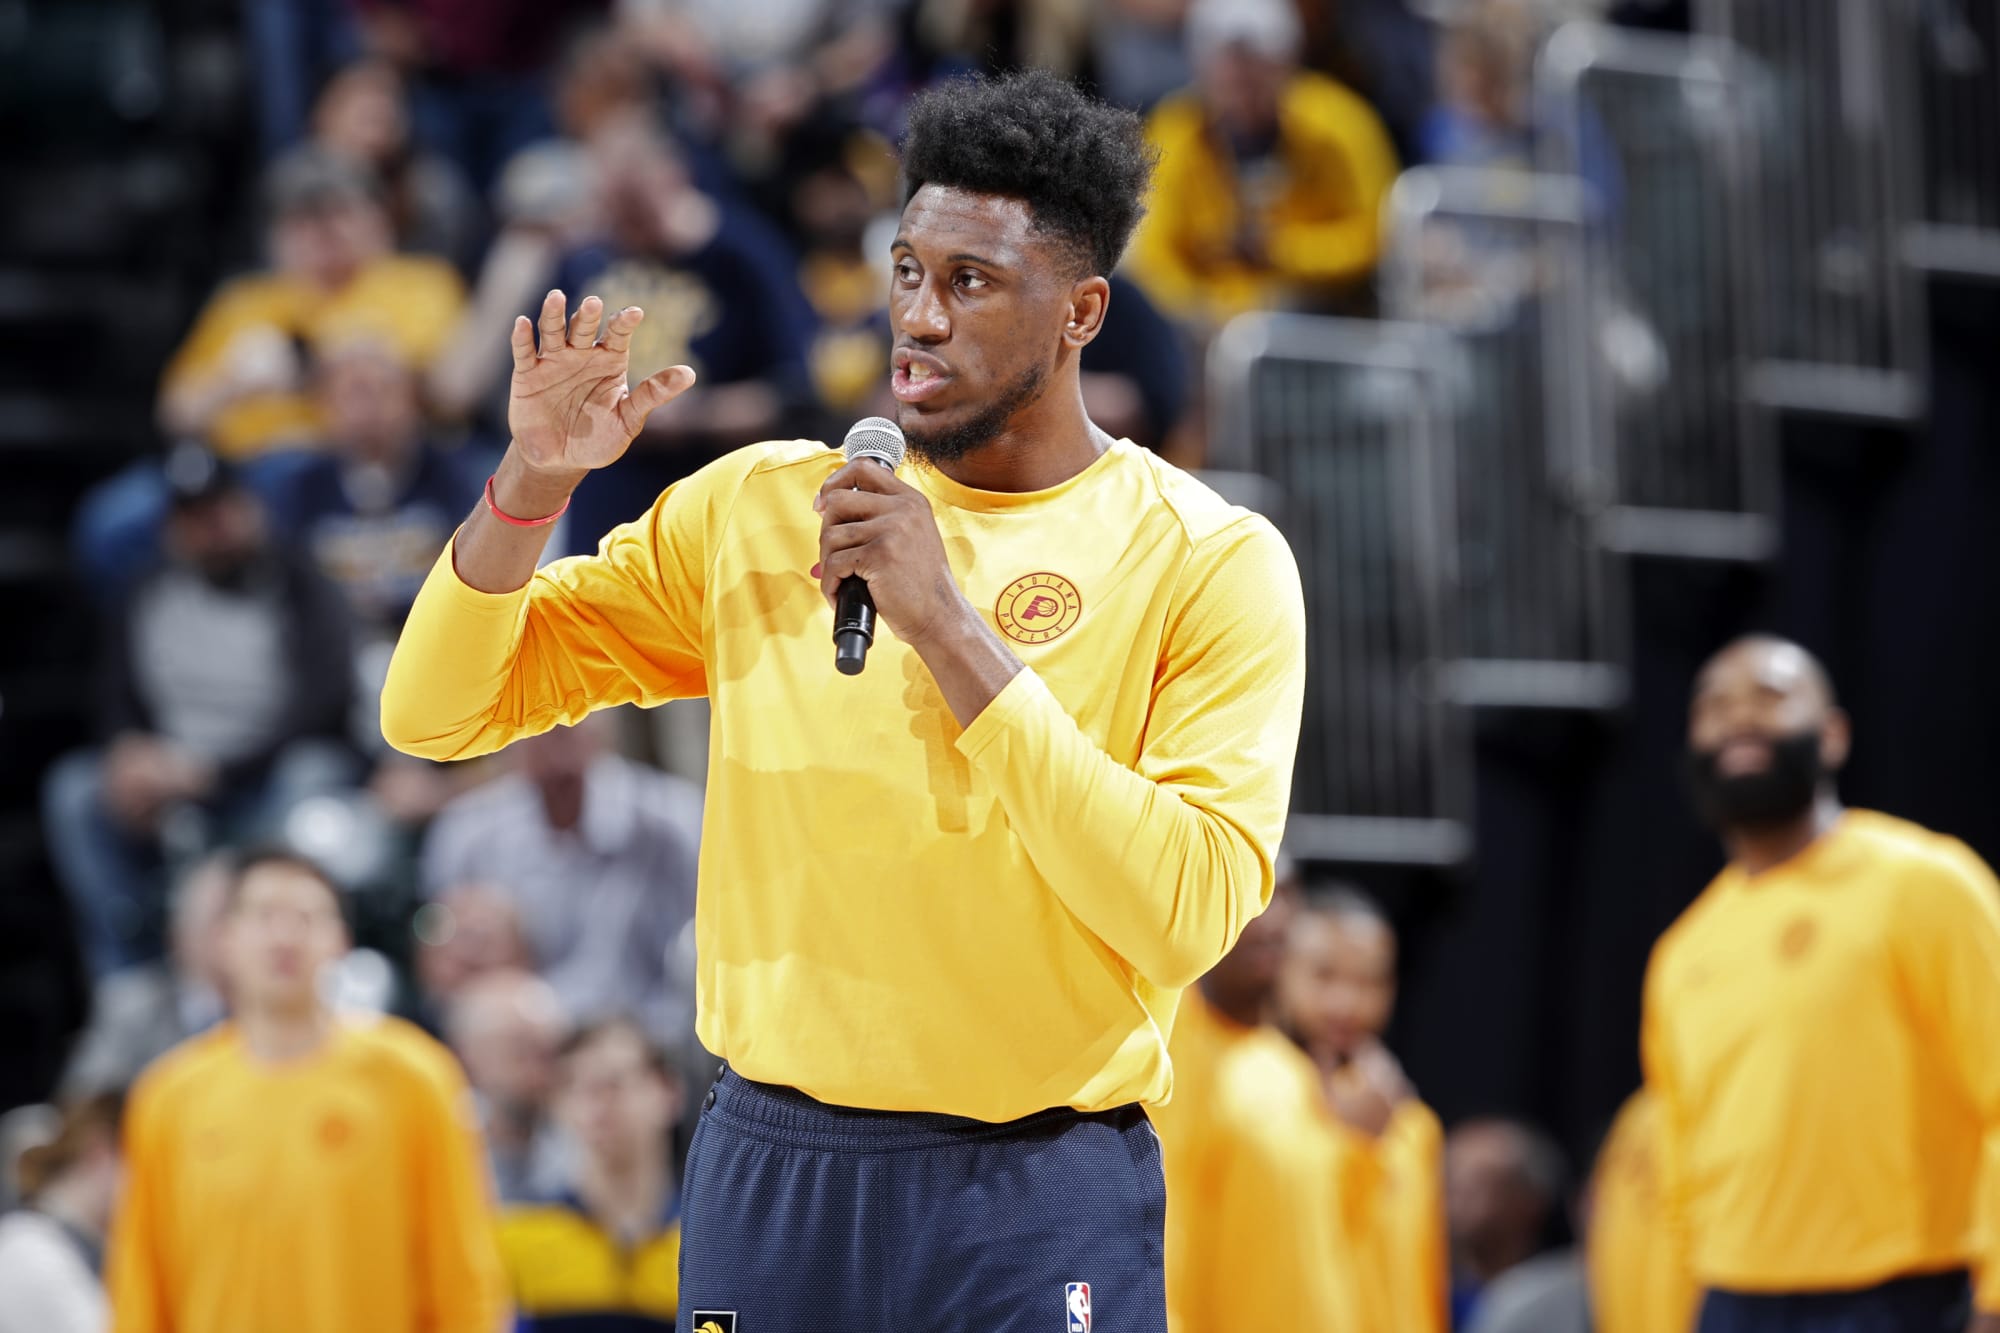 Who will take over as the veteran leader for the Indiana Pacers?